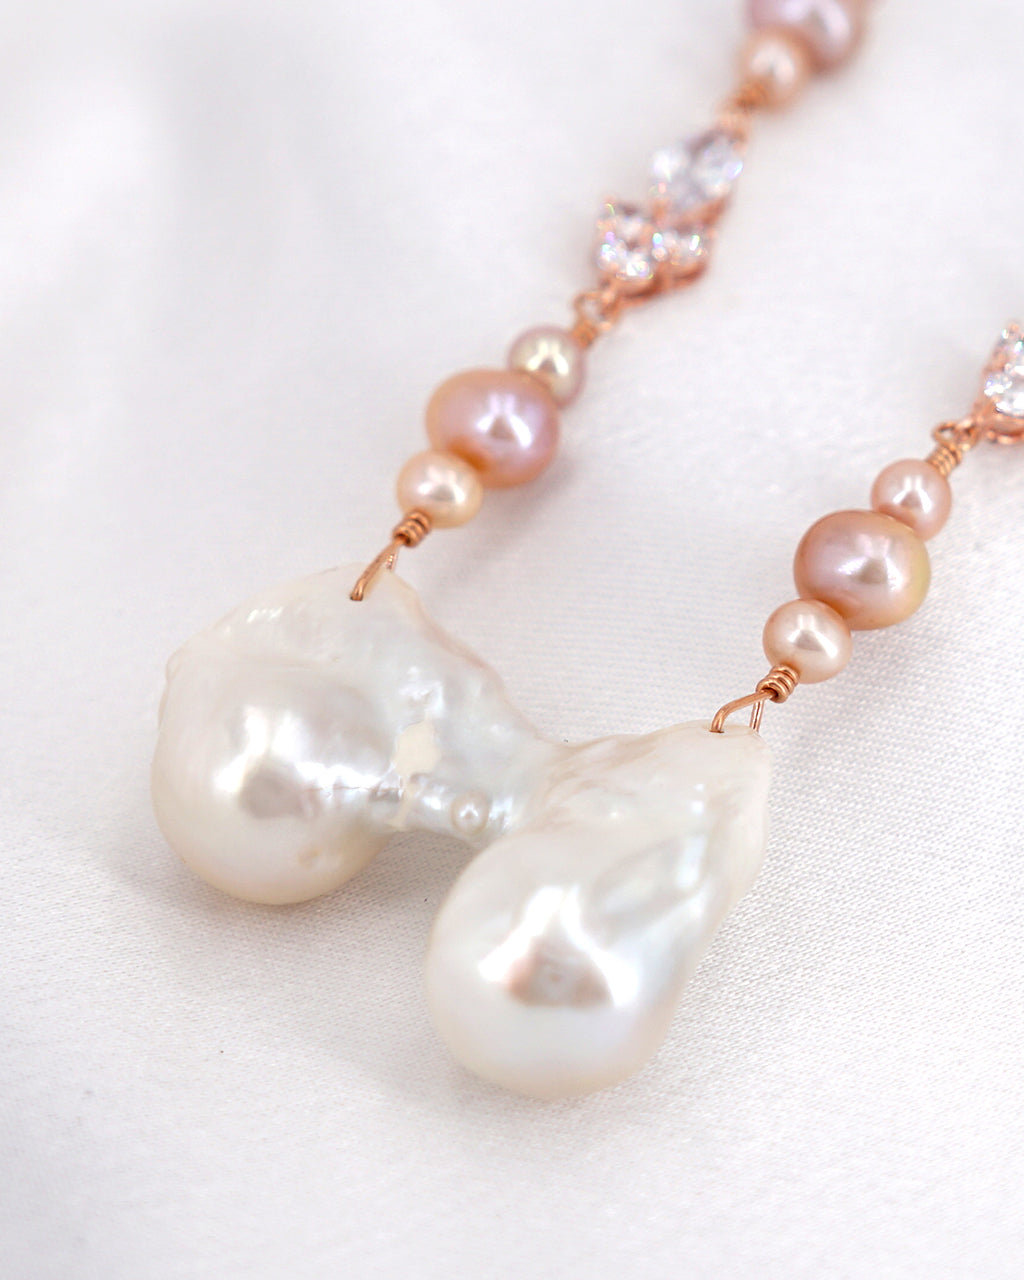 Twin White Baroque Pearl Necklace - Golden Pink - Wedding Bridal Jewelry for Brides and Bridesmaids | Baroque Pearl Jewelry for Mother's Day Gifts